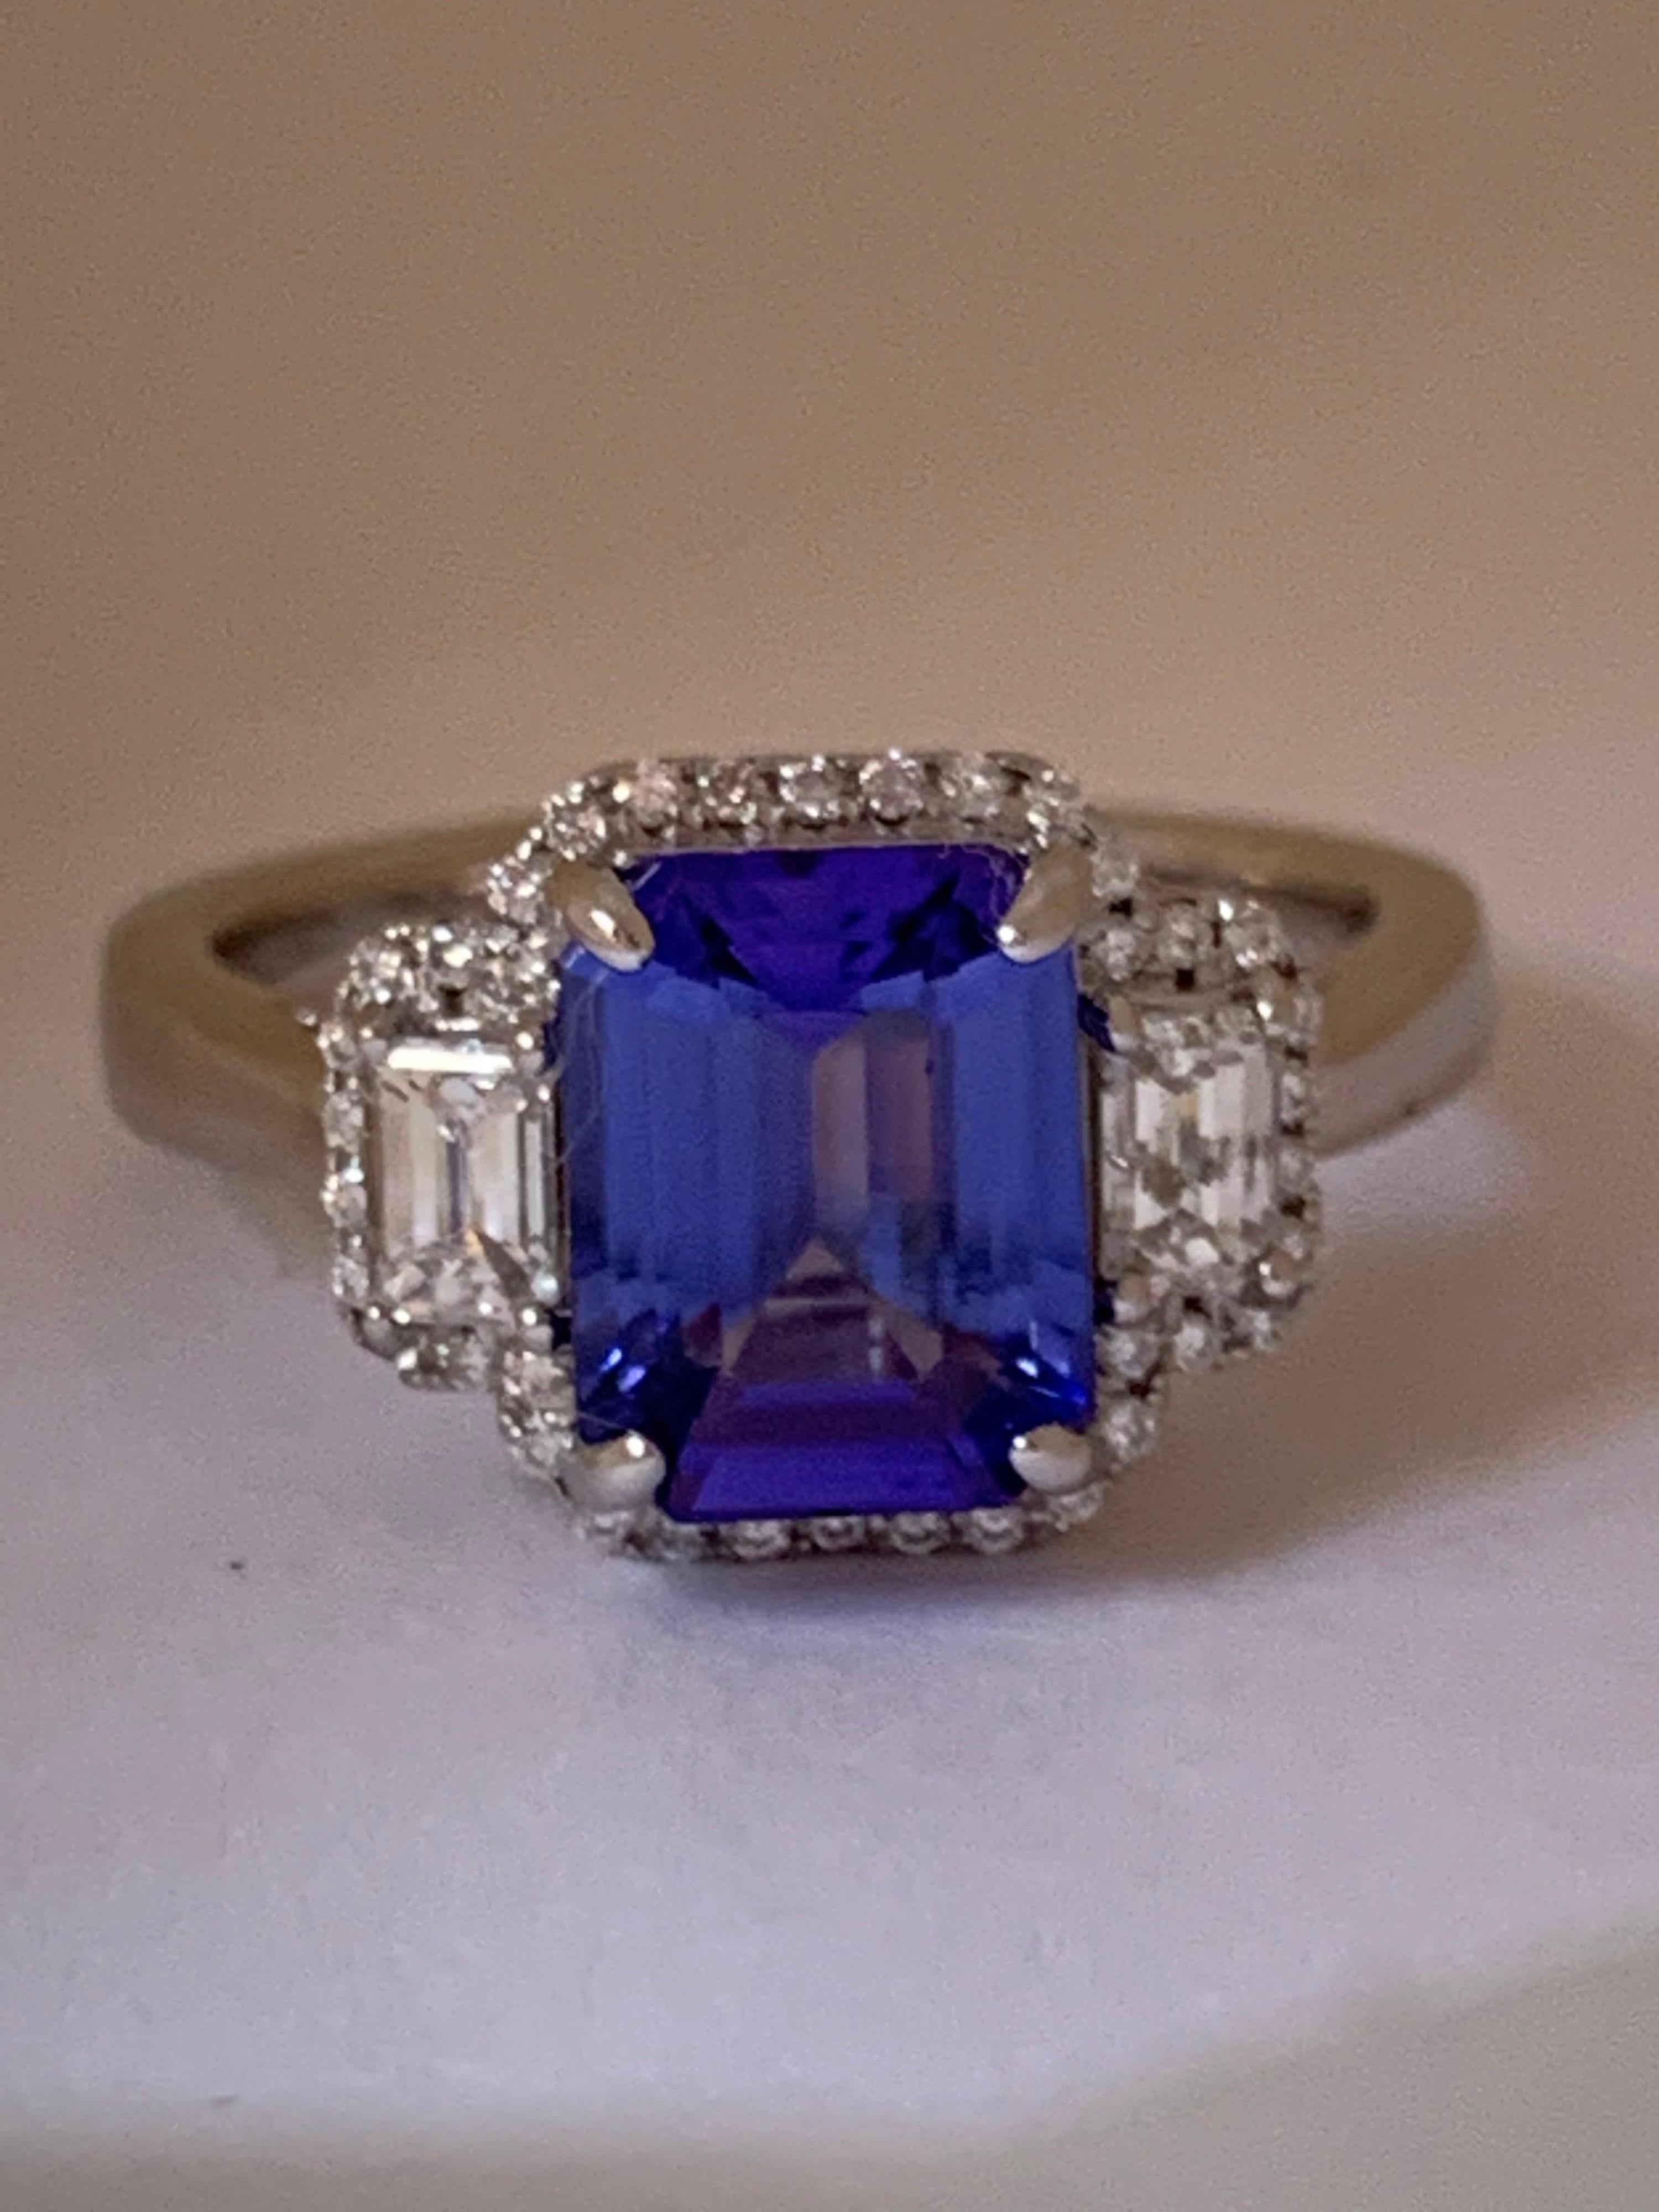 Natural AAA Quality 2.75 carat Tanzanite Emerald cut shape and 0.50 carat round and two emerald cut diamonds on the side is set in 14 Karat white gold , handcrafted one of a kind Ring, The Ring is size 7 but can be resized if needed.